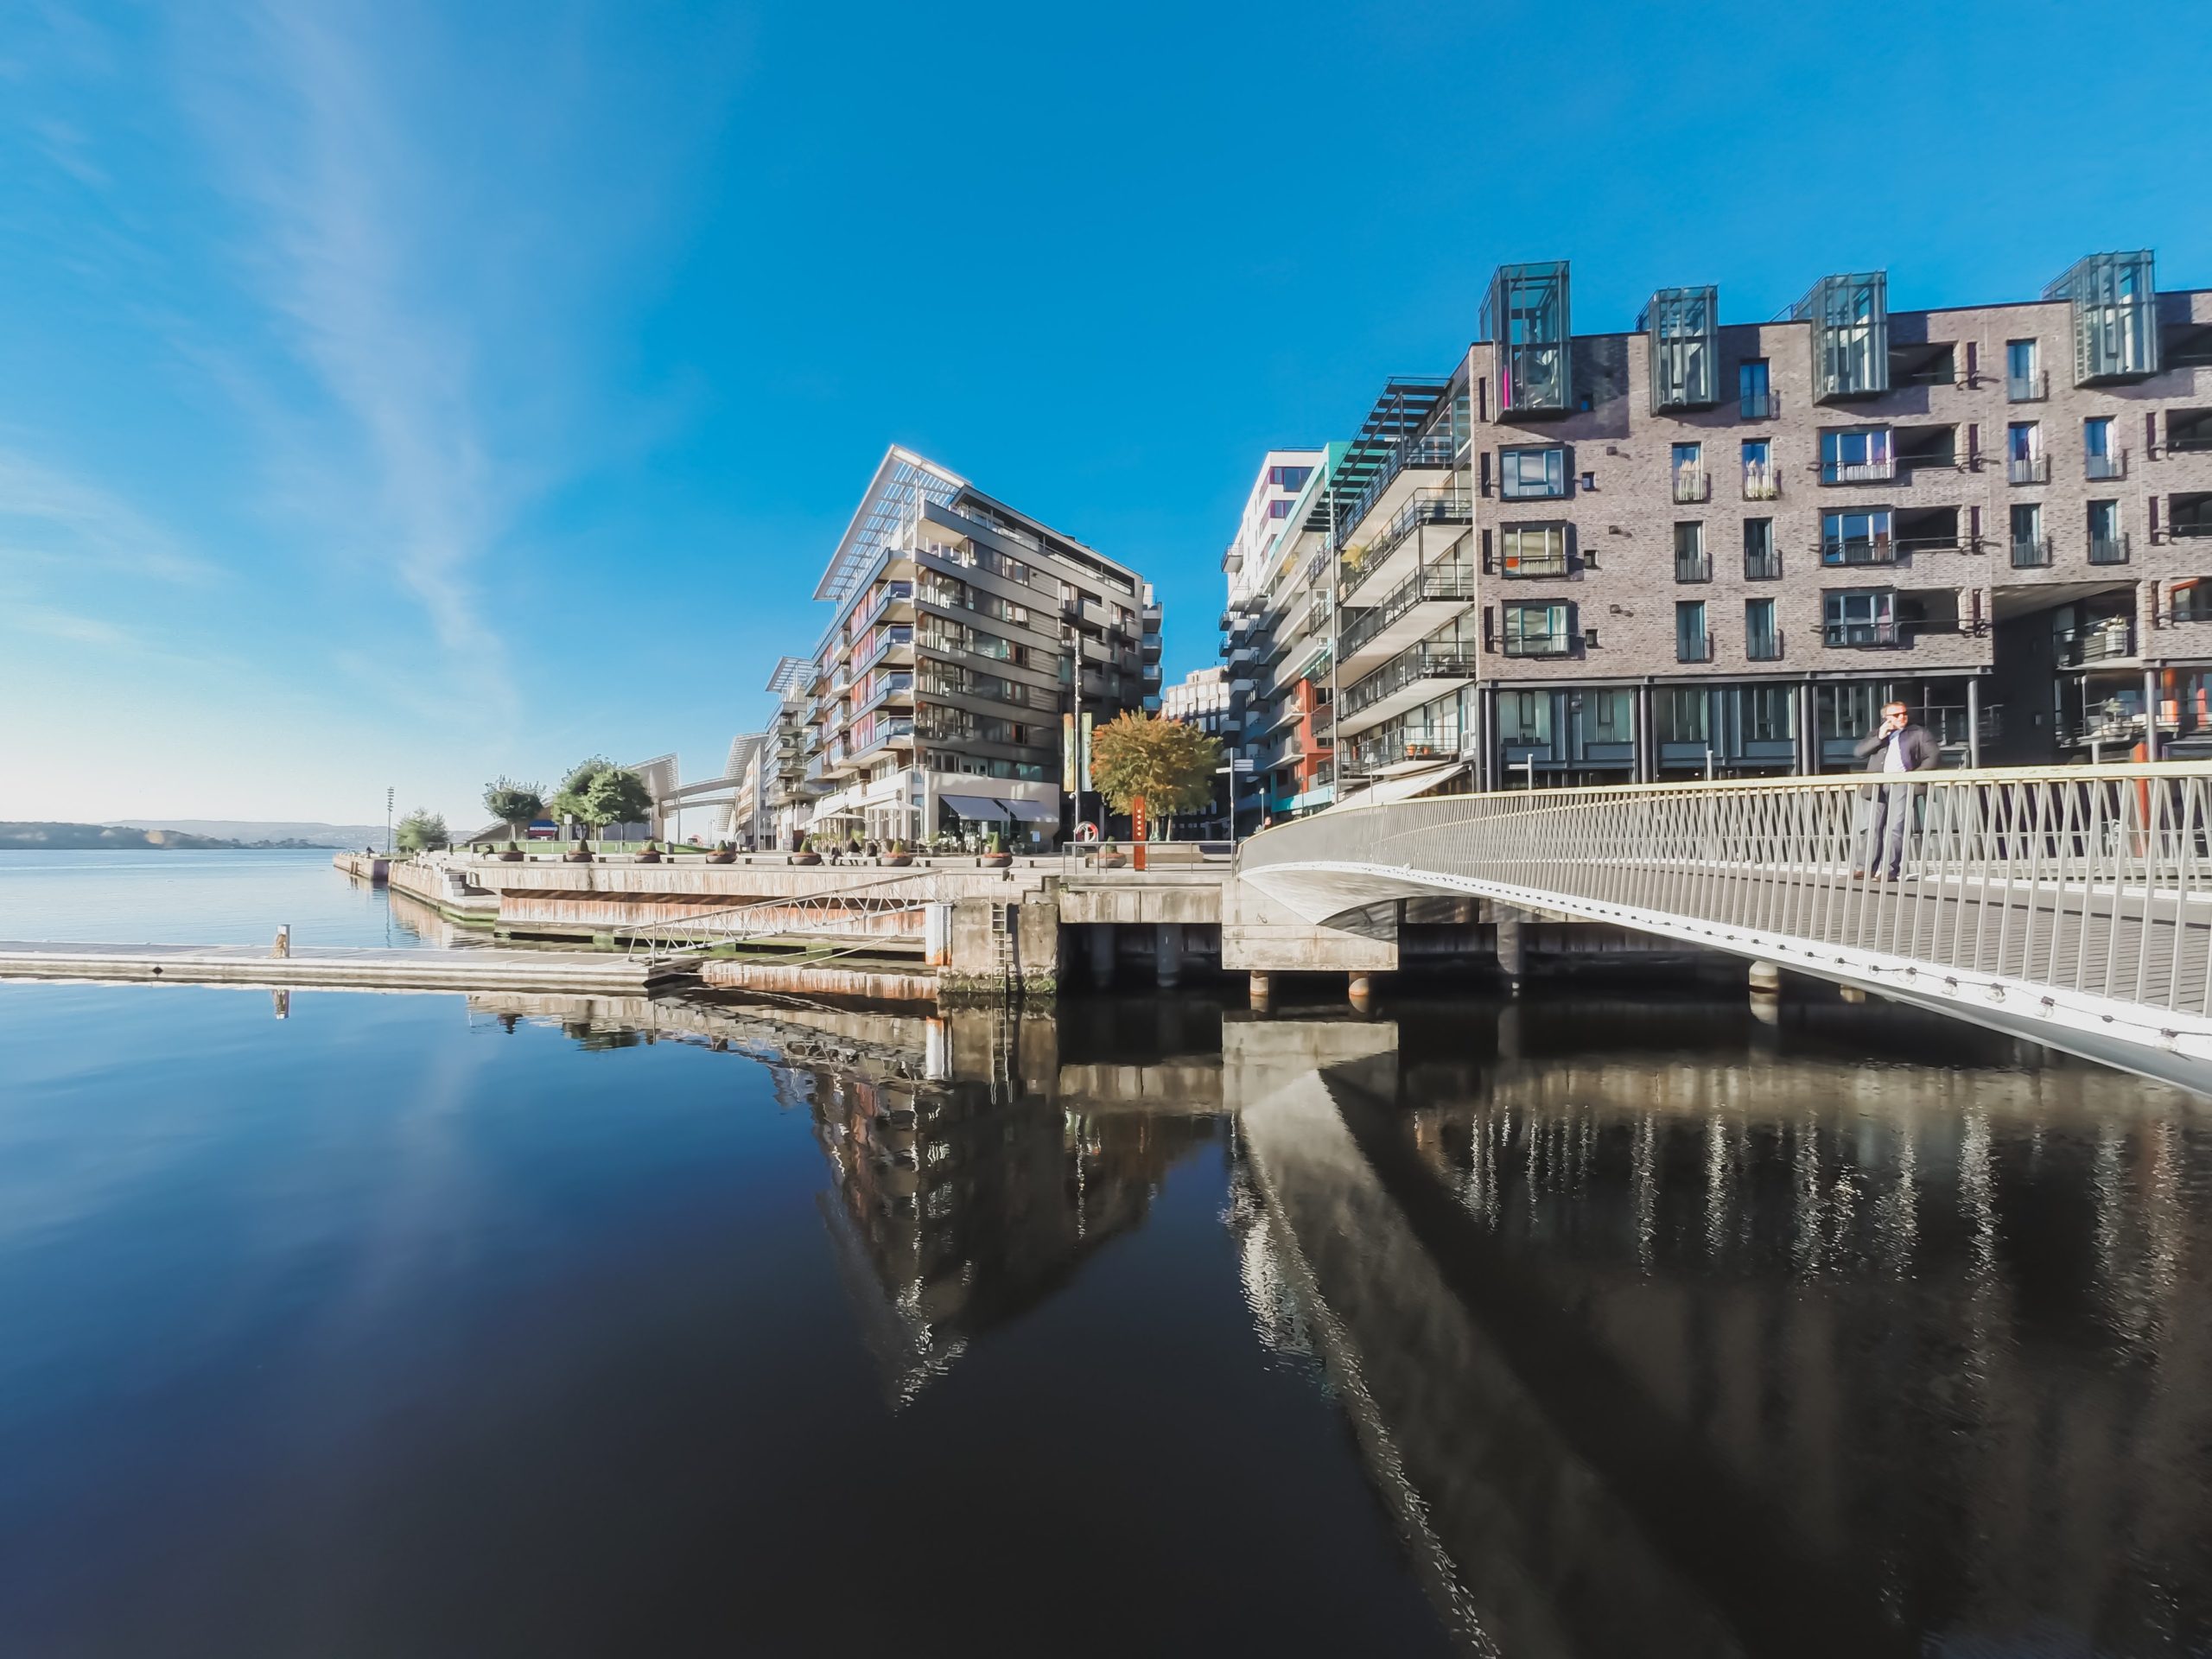 A photo of Aker Brygge during daytime | Oslo: A Must See List of Unique Sites And Museums | Amitylux Tours | Scandinavian Guided Tours | VIP & Luxury Experiences in the Nordics